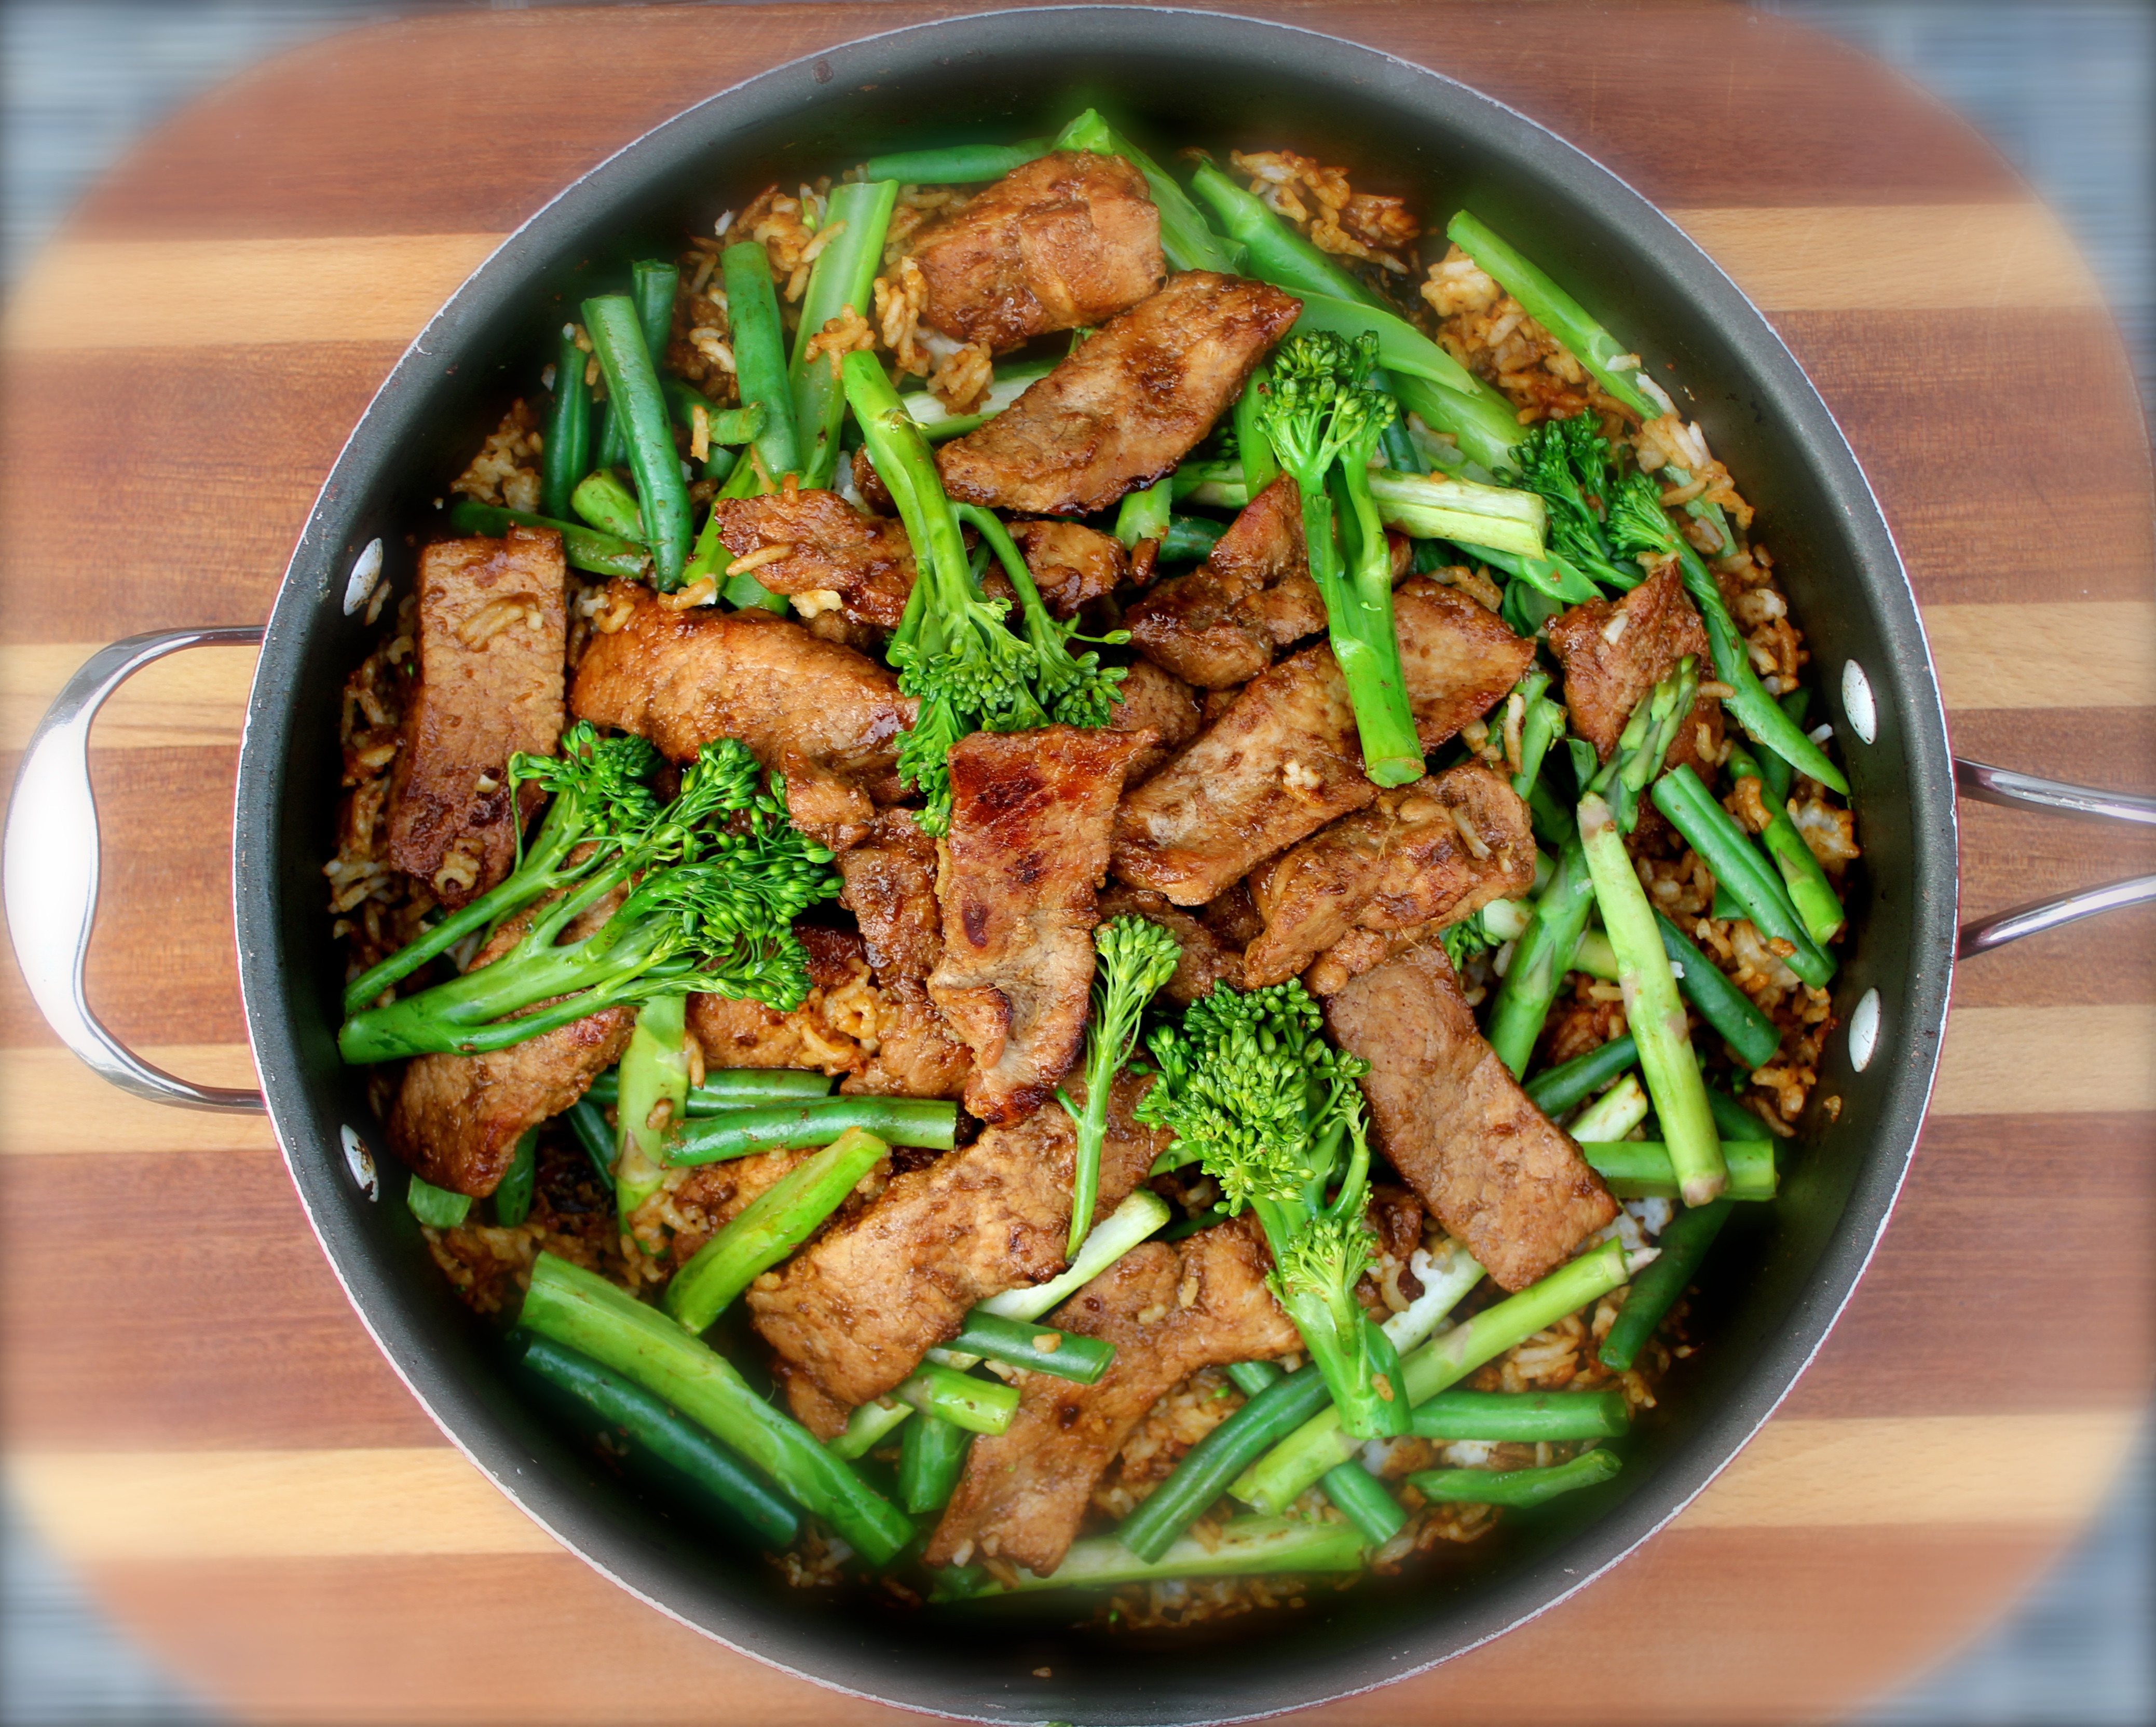 Hoi Sin Pork, Fried Rice and Steamed Greens | cook fast eat slow